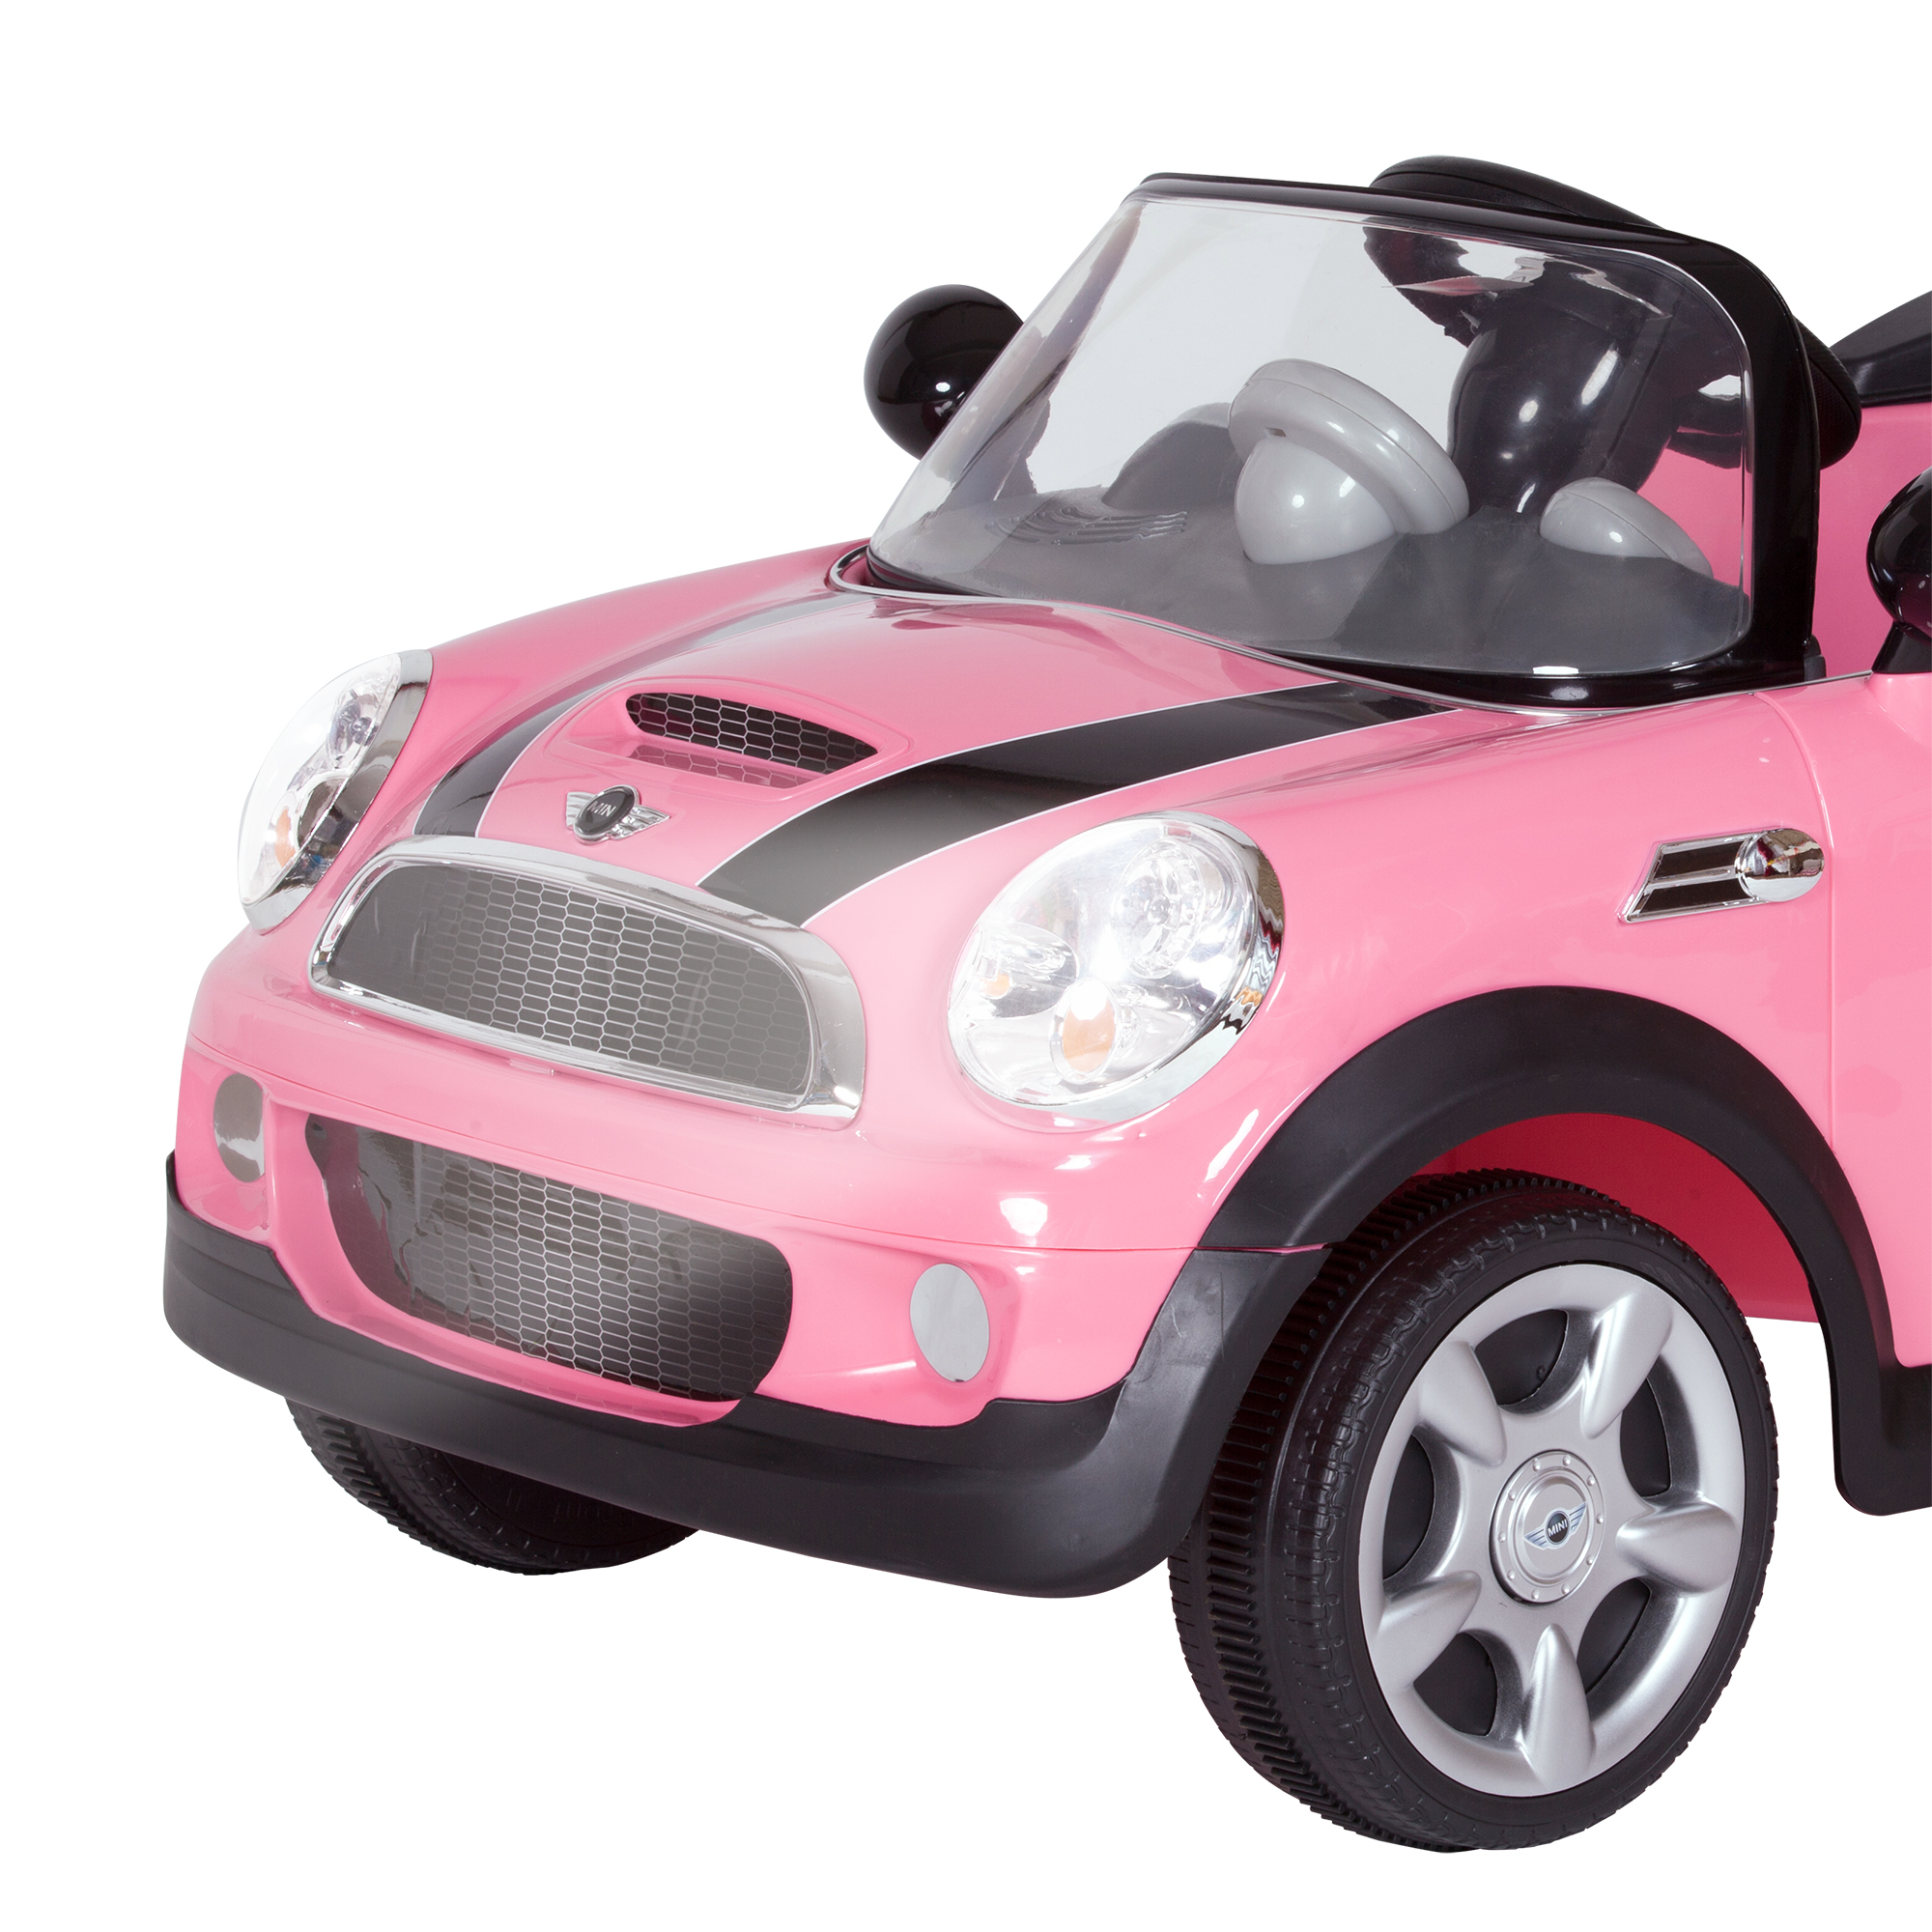 Rollplay 6v Mini Cooper Powered Ride-on - Pink for sale online | eBay